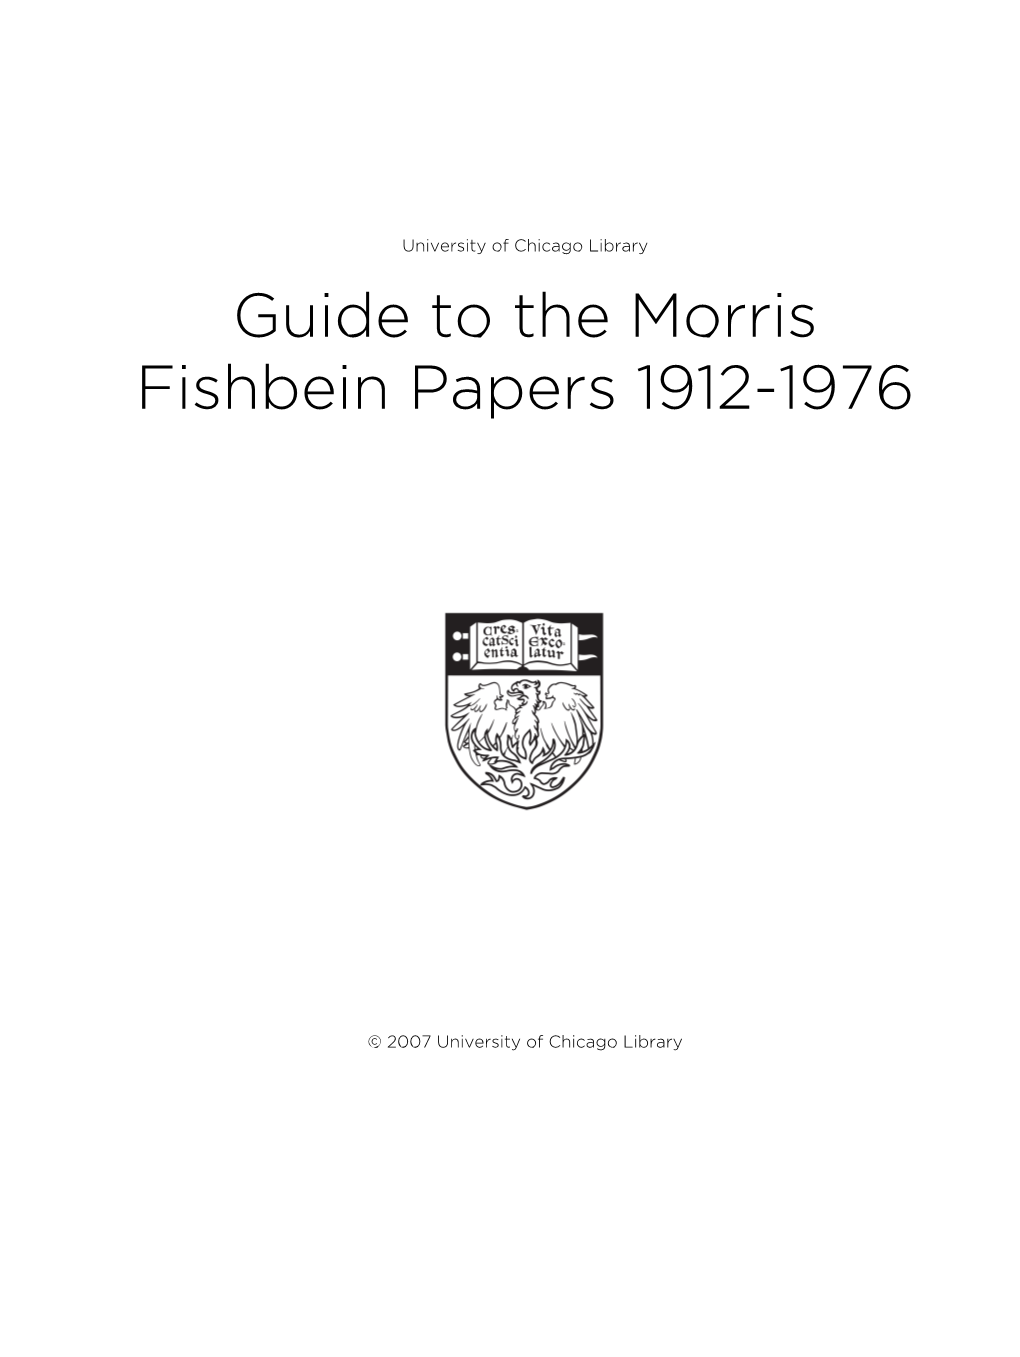 Guide to the Morris Fishbein Papers 1912-1976